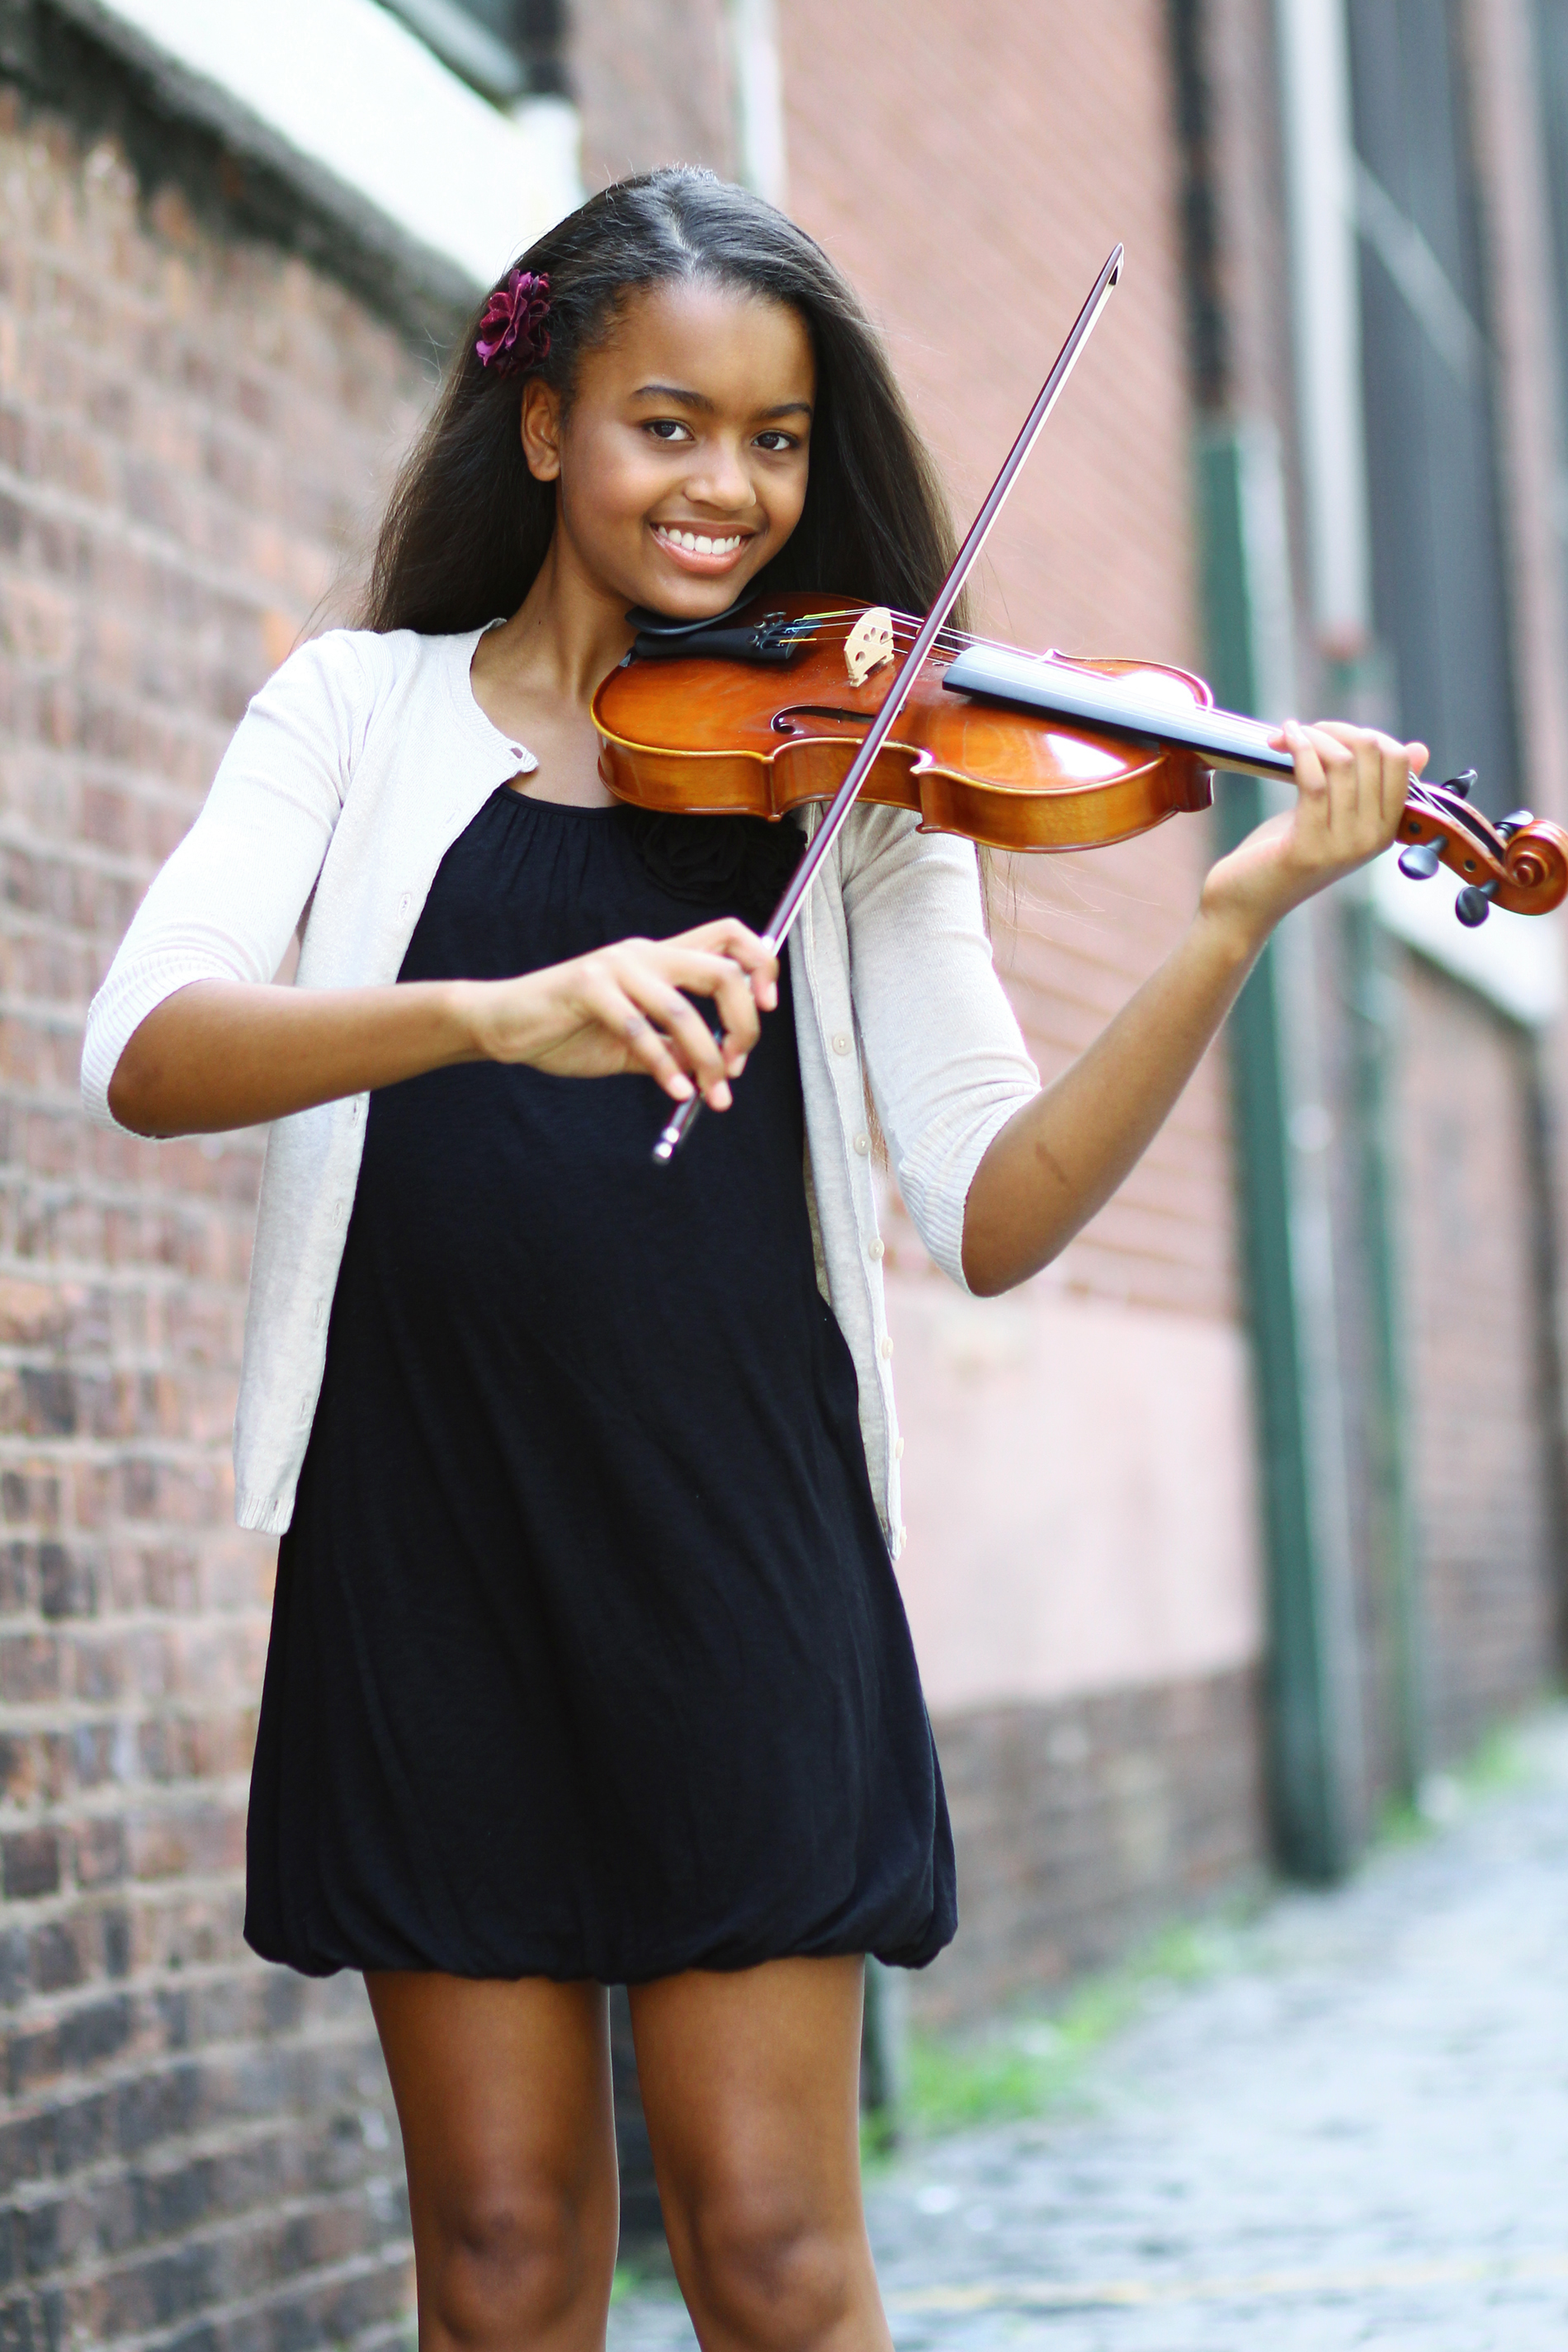 Lauren Hunt NYC photoshoot. She really does play violin! 2011